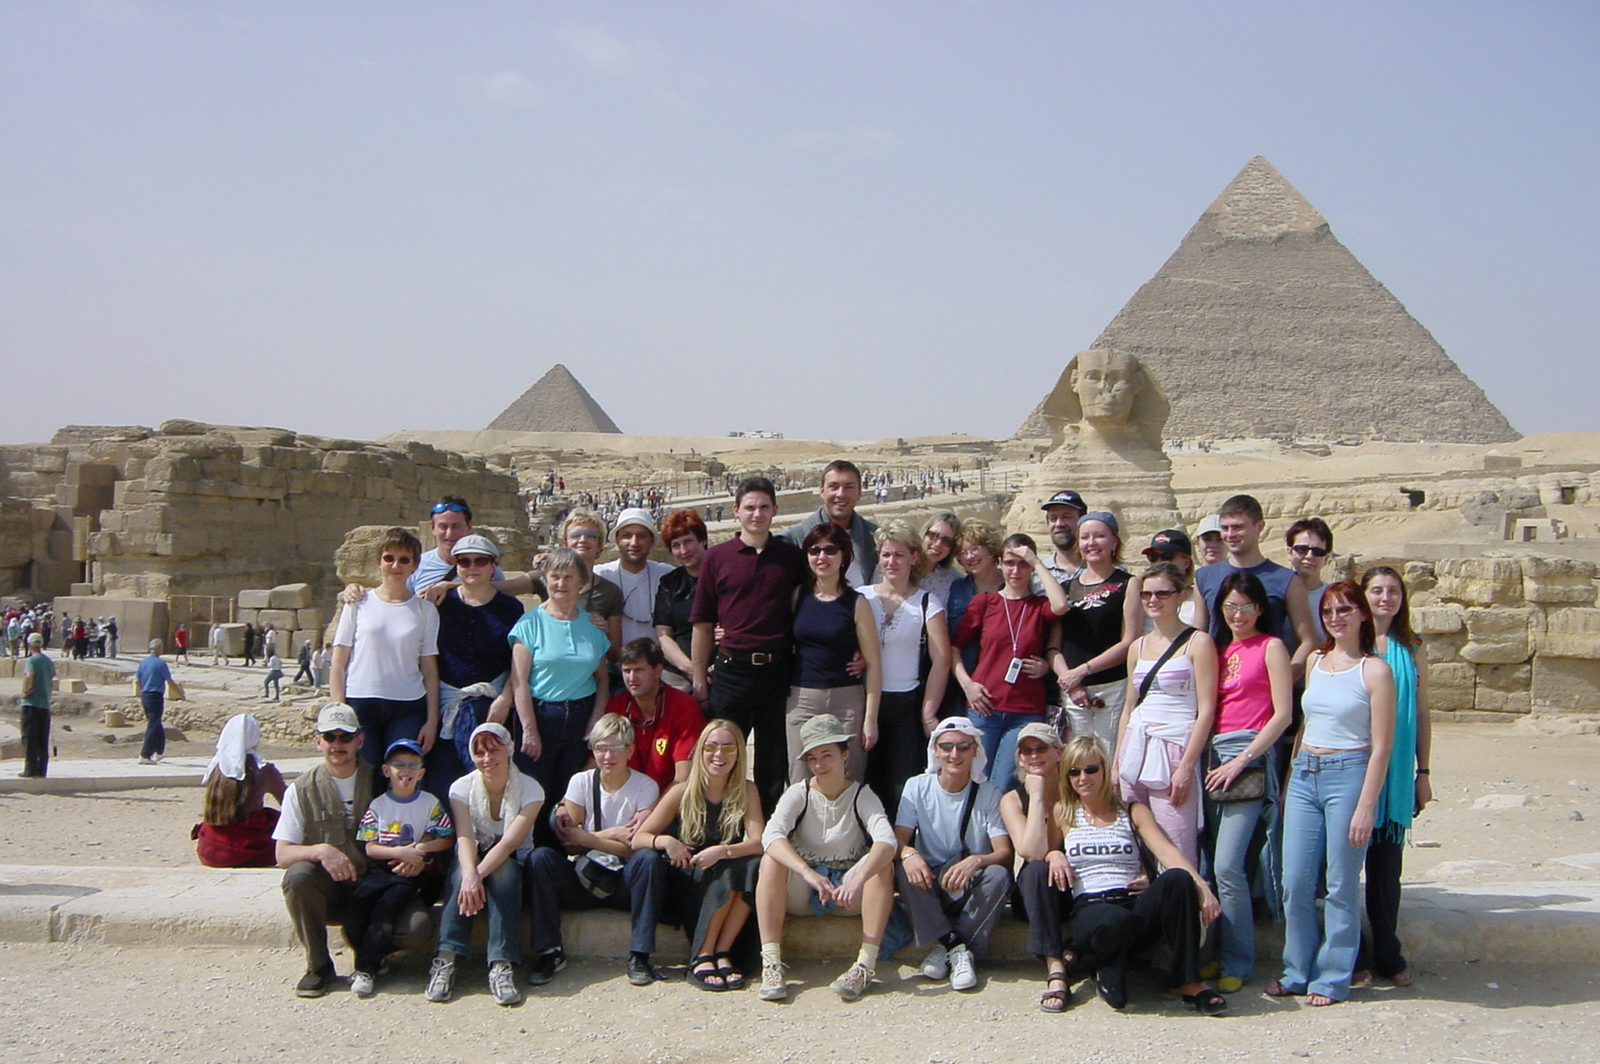 
Excursion to the Pyramids from Ain Sokhna